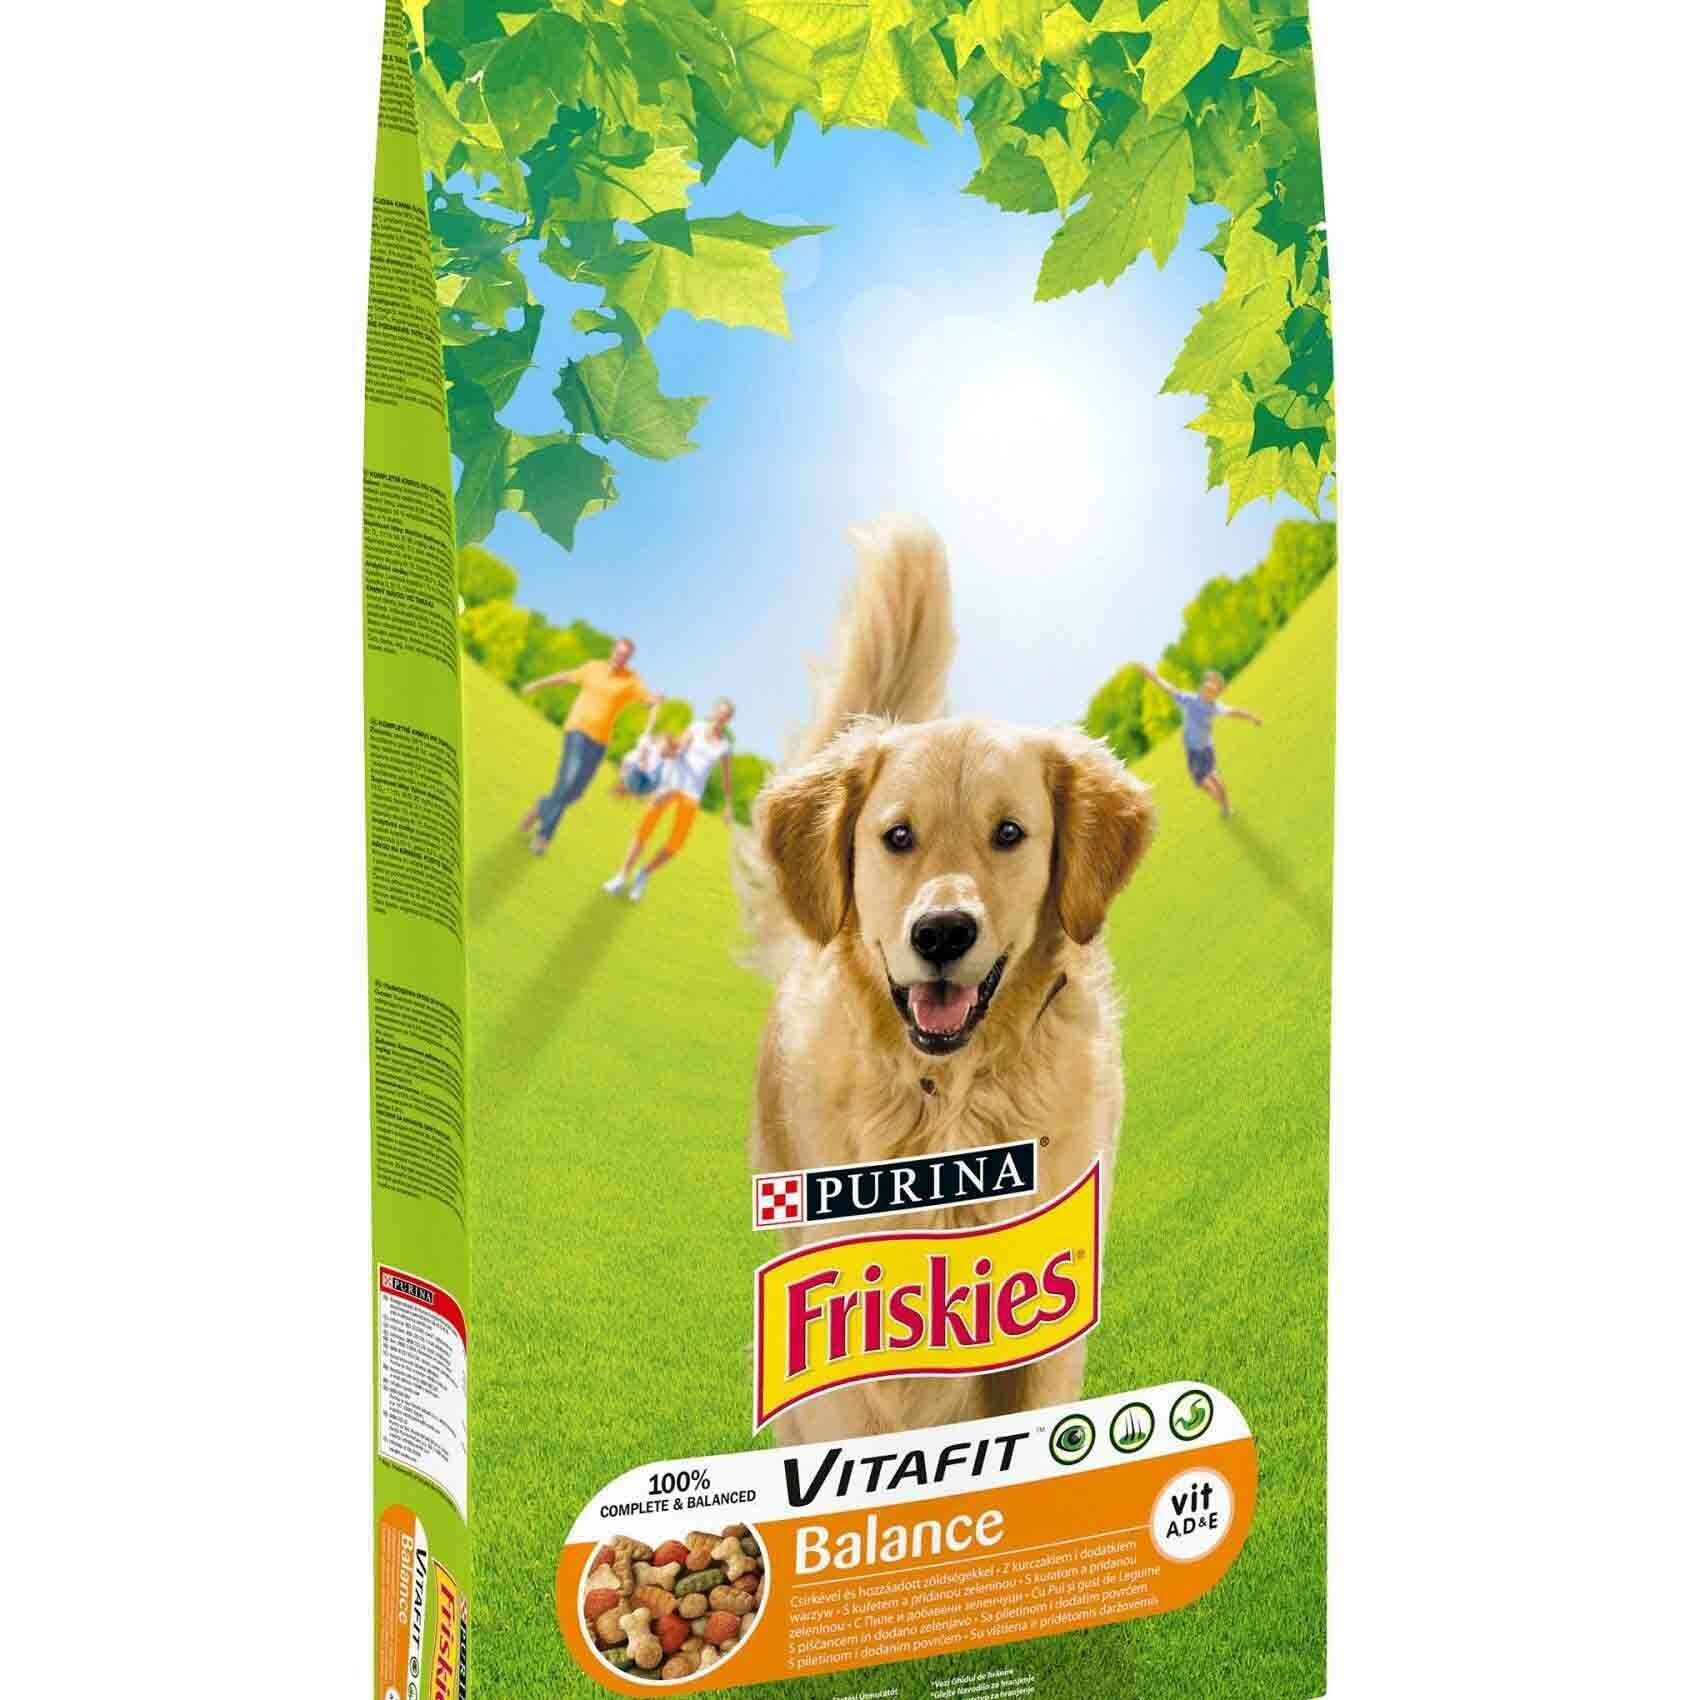 Buy Purina Friskies Balance Dog Food With Chicken And Vegetables 10kg Online Shop On Carrefour Uae